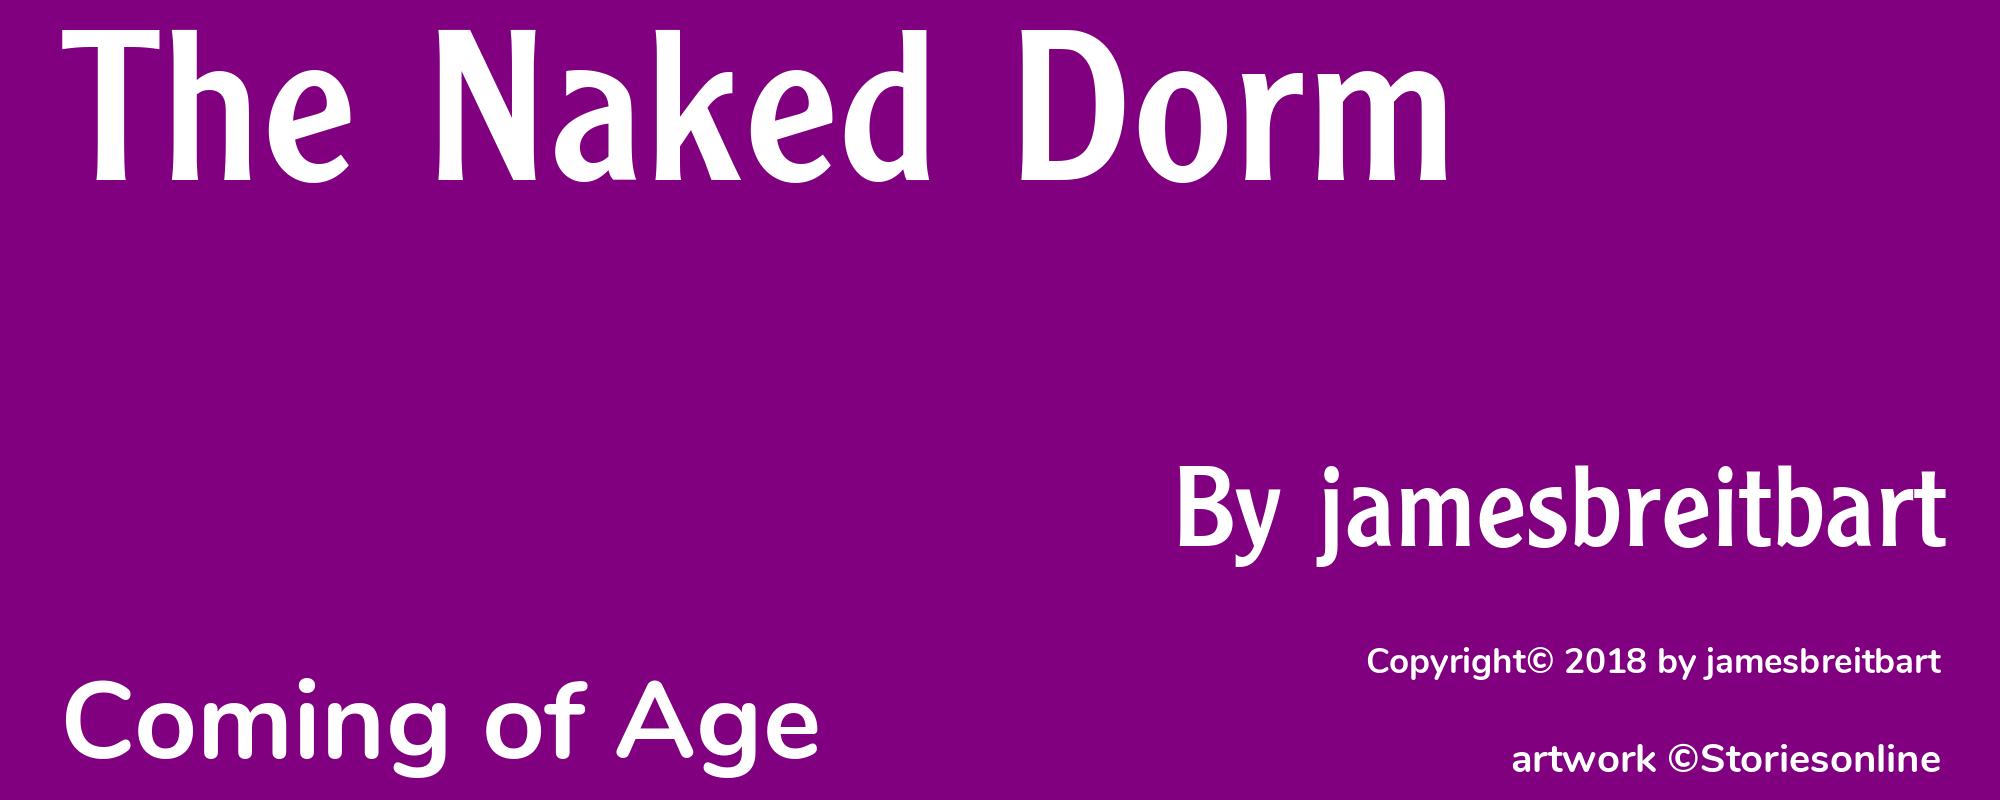 The Naked Dorm - Cover